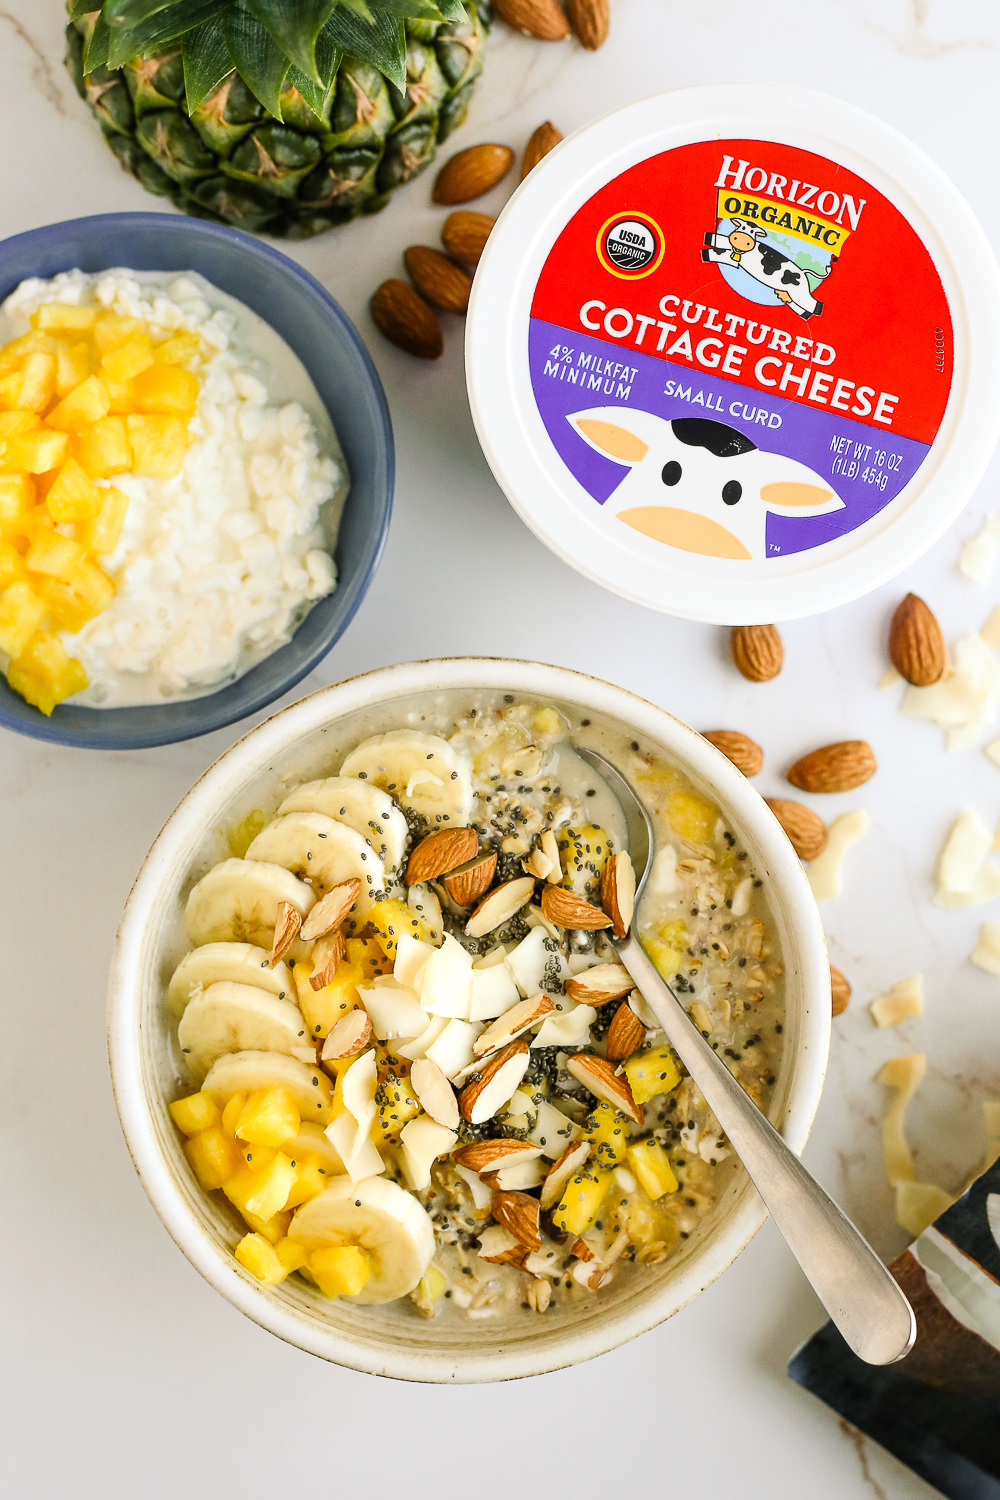 Overhead view of cottage cheese in oatmeal, showing a container of cottage cheese, a bowl of cottage cheese and pineapple, and an oatmeal bowl with bananas, pineapple, almonds, and coconut